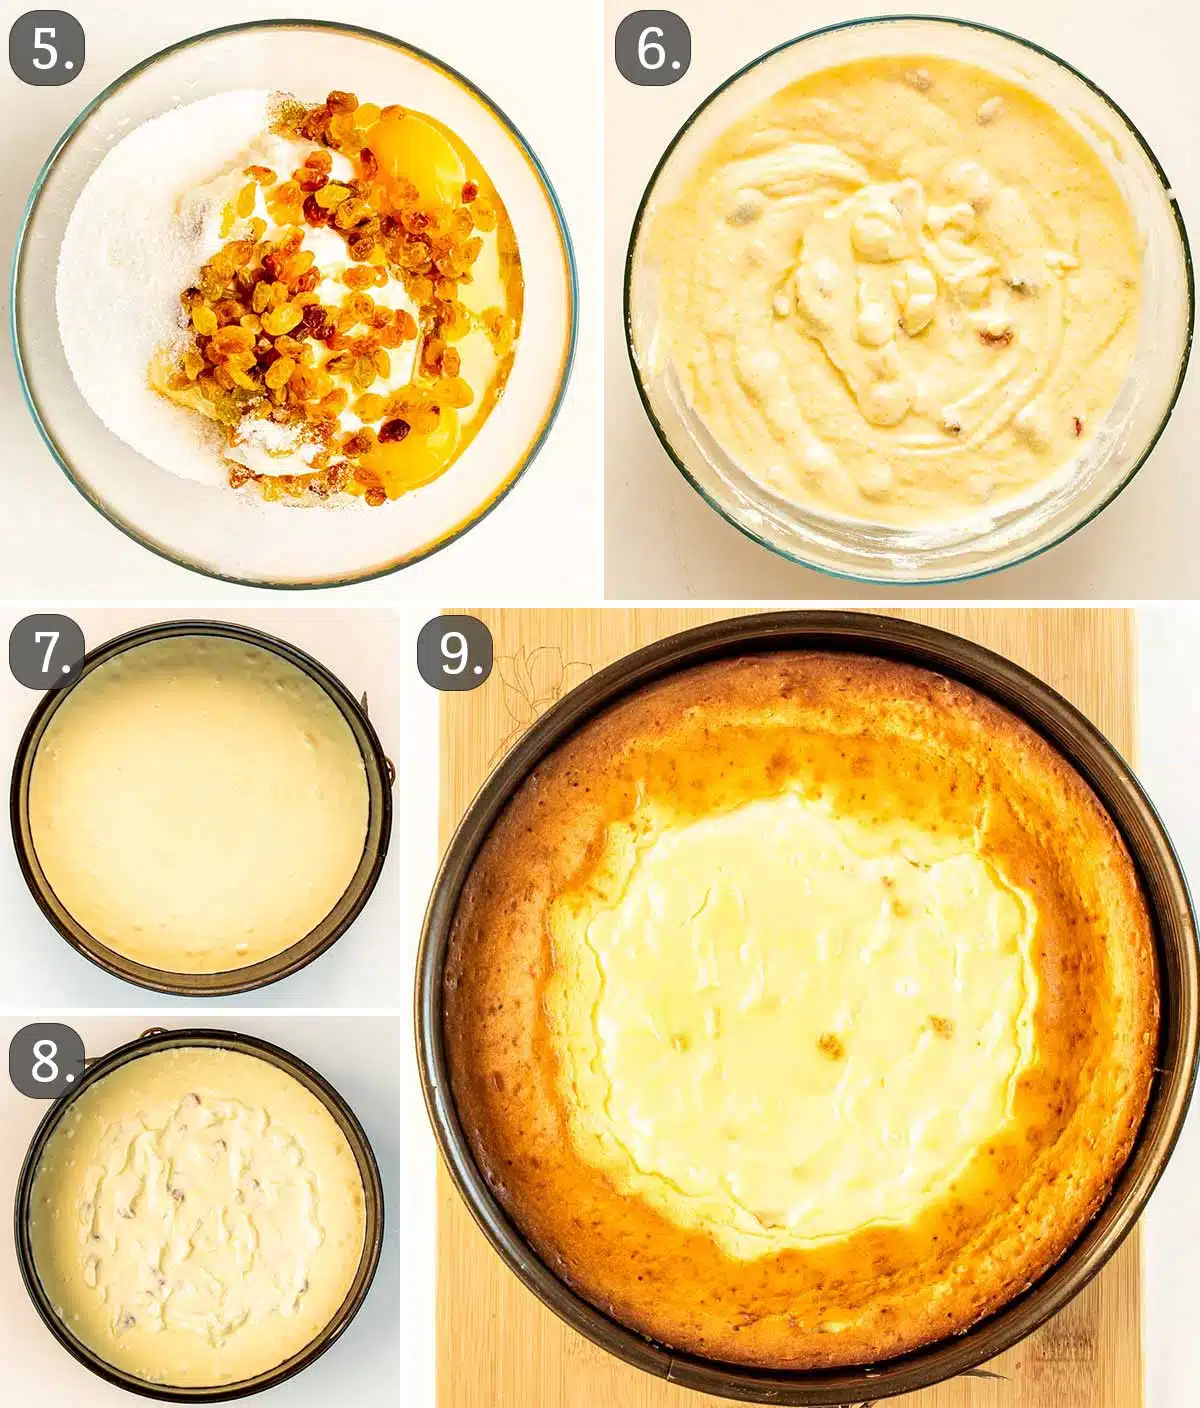 process shots showing how to make ricotta cheesecake.